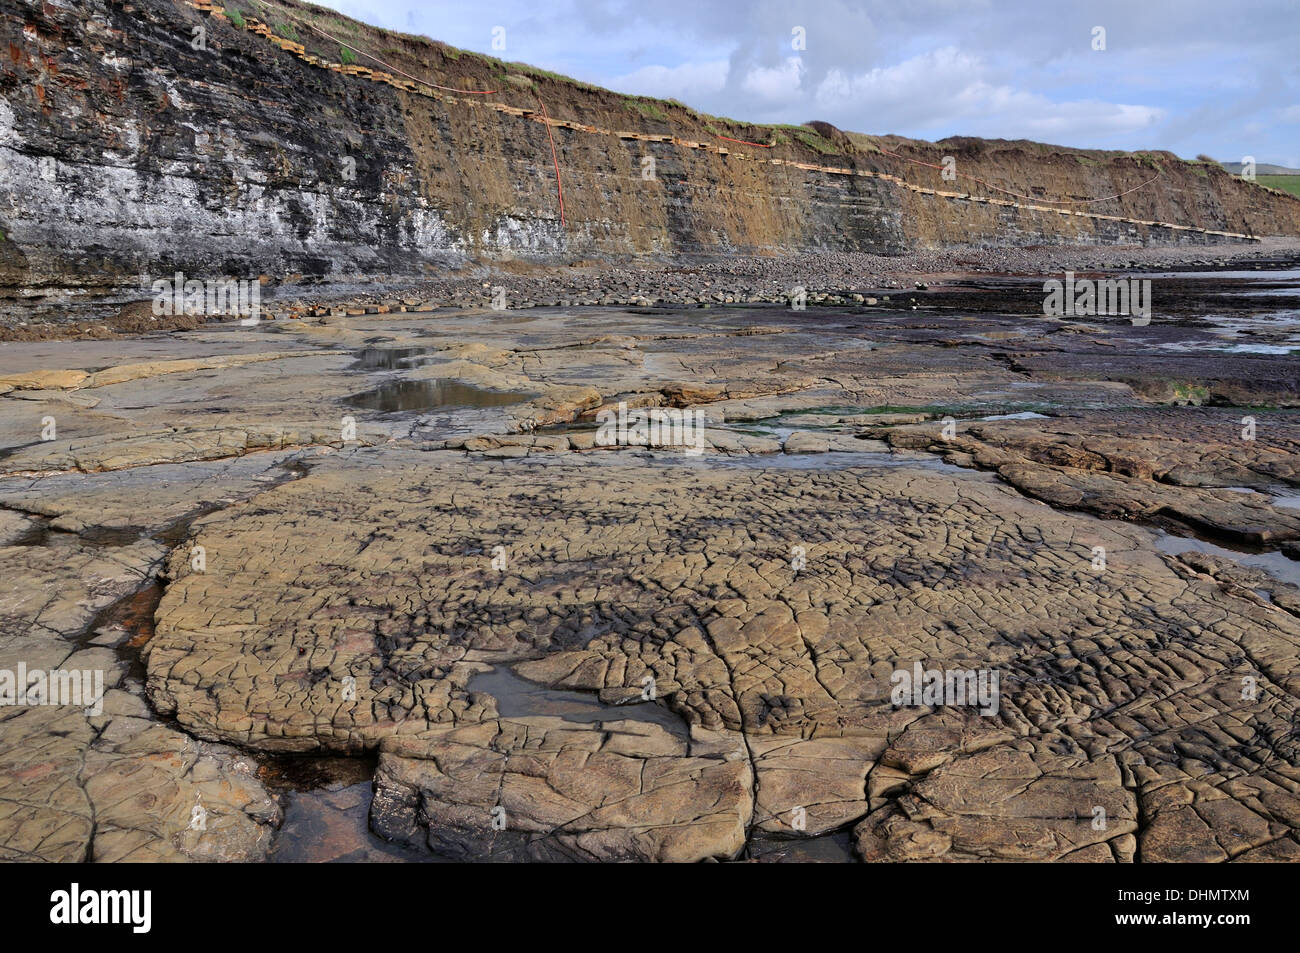 A view of the dolomite bed at Kimmeridge Bay at low tide Dorset UK Stock Photo